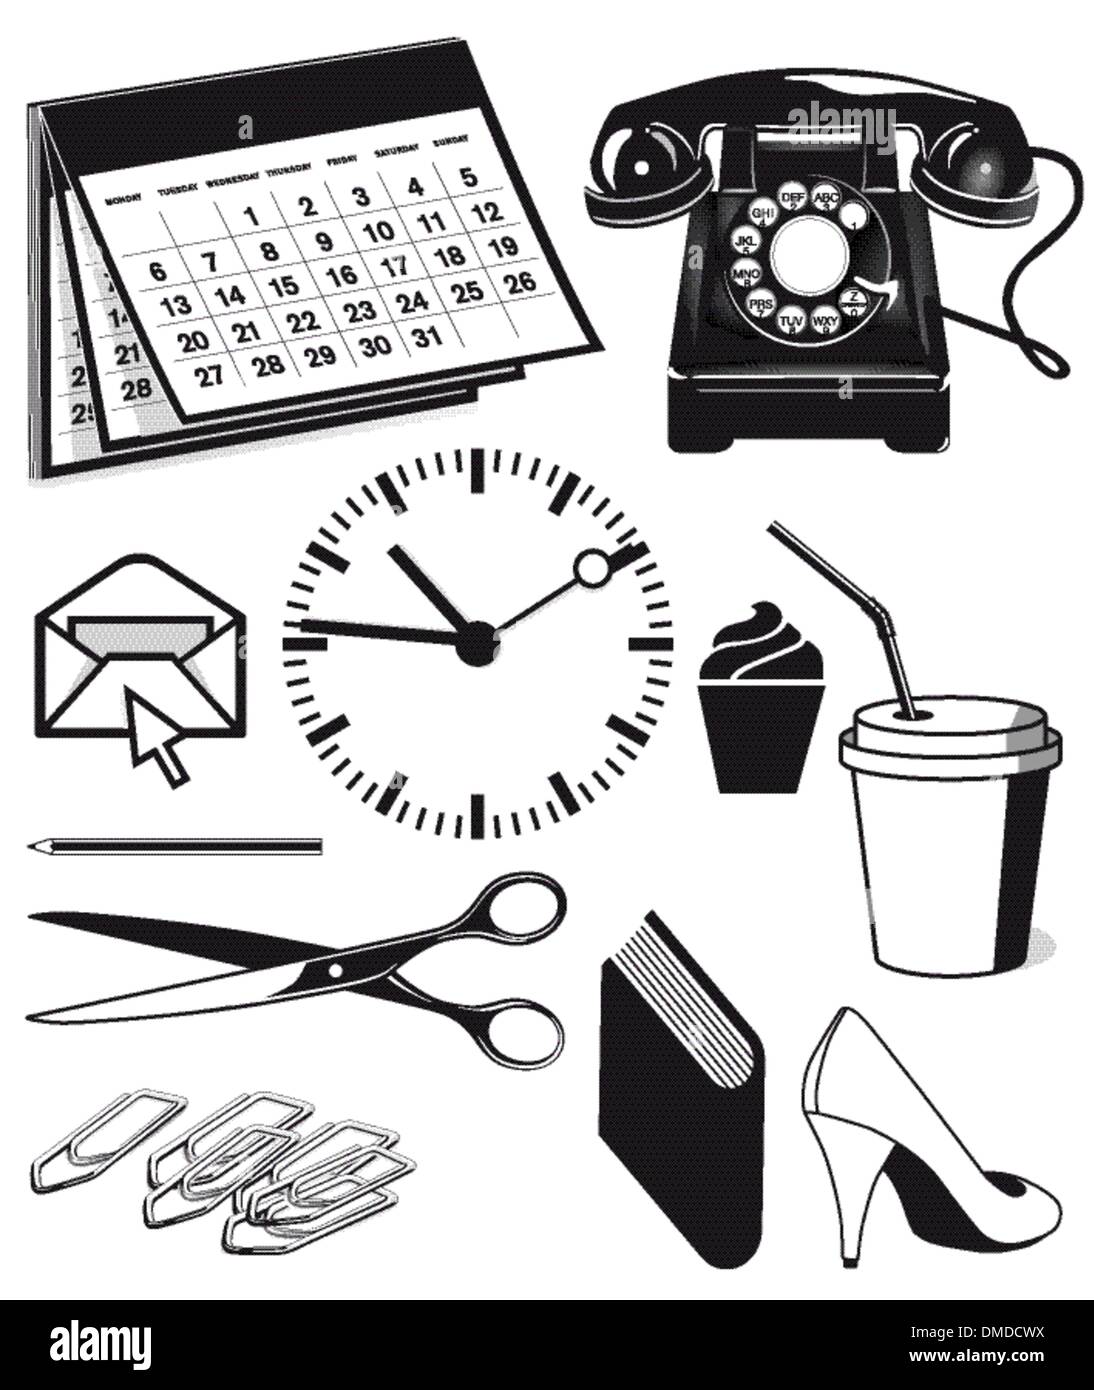 Office supplies stationery Cut Out Stock Images & Pictures - Alamy